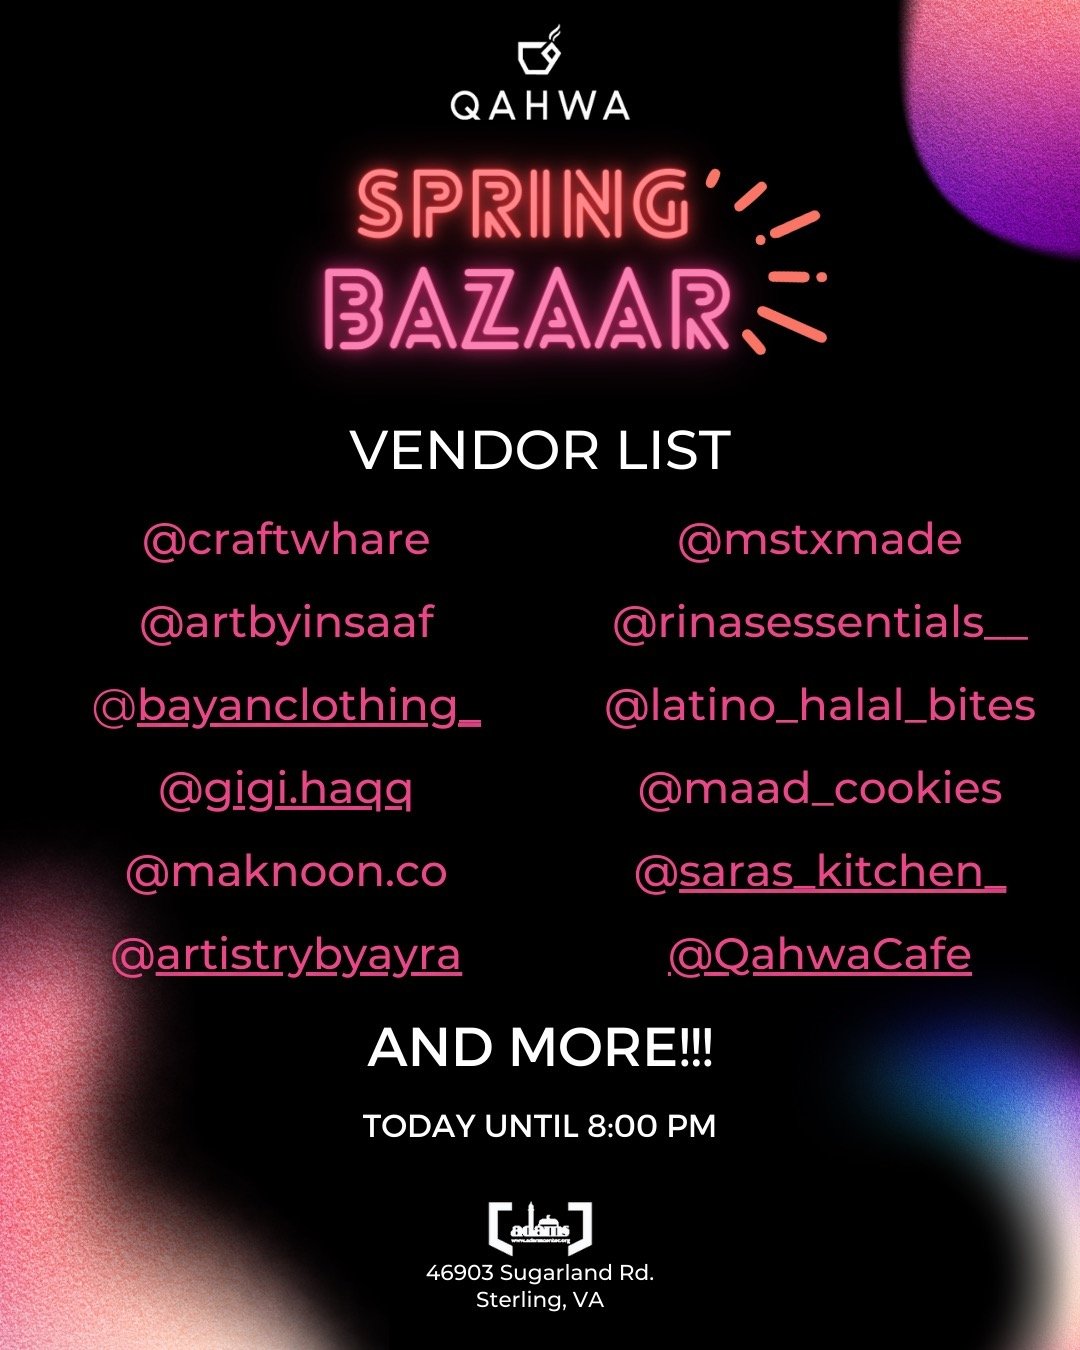 The Spring Bazaar is happening right now! Come check out all these vendors and more, the weather is perfect!!! 🥘🚚☀️